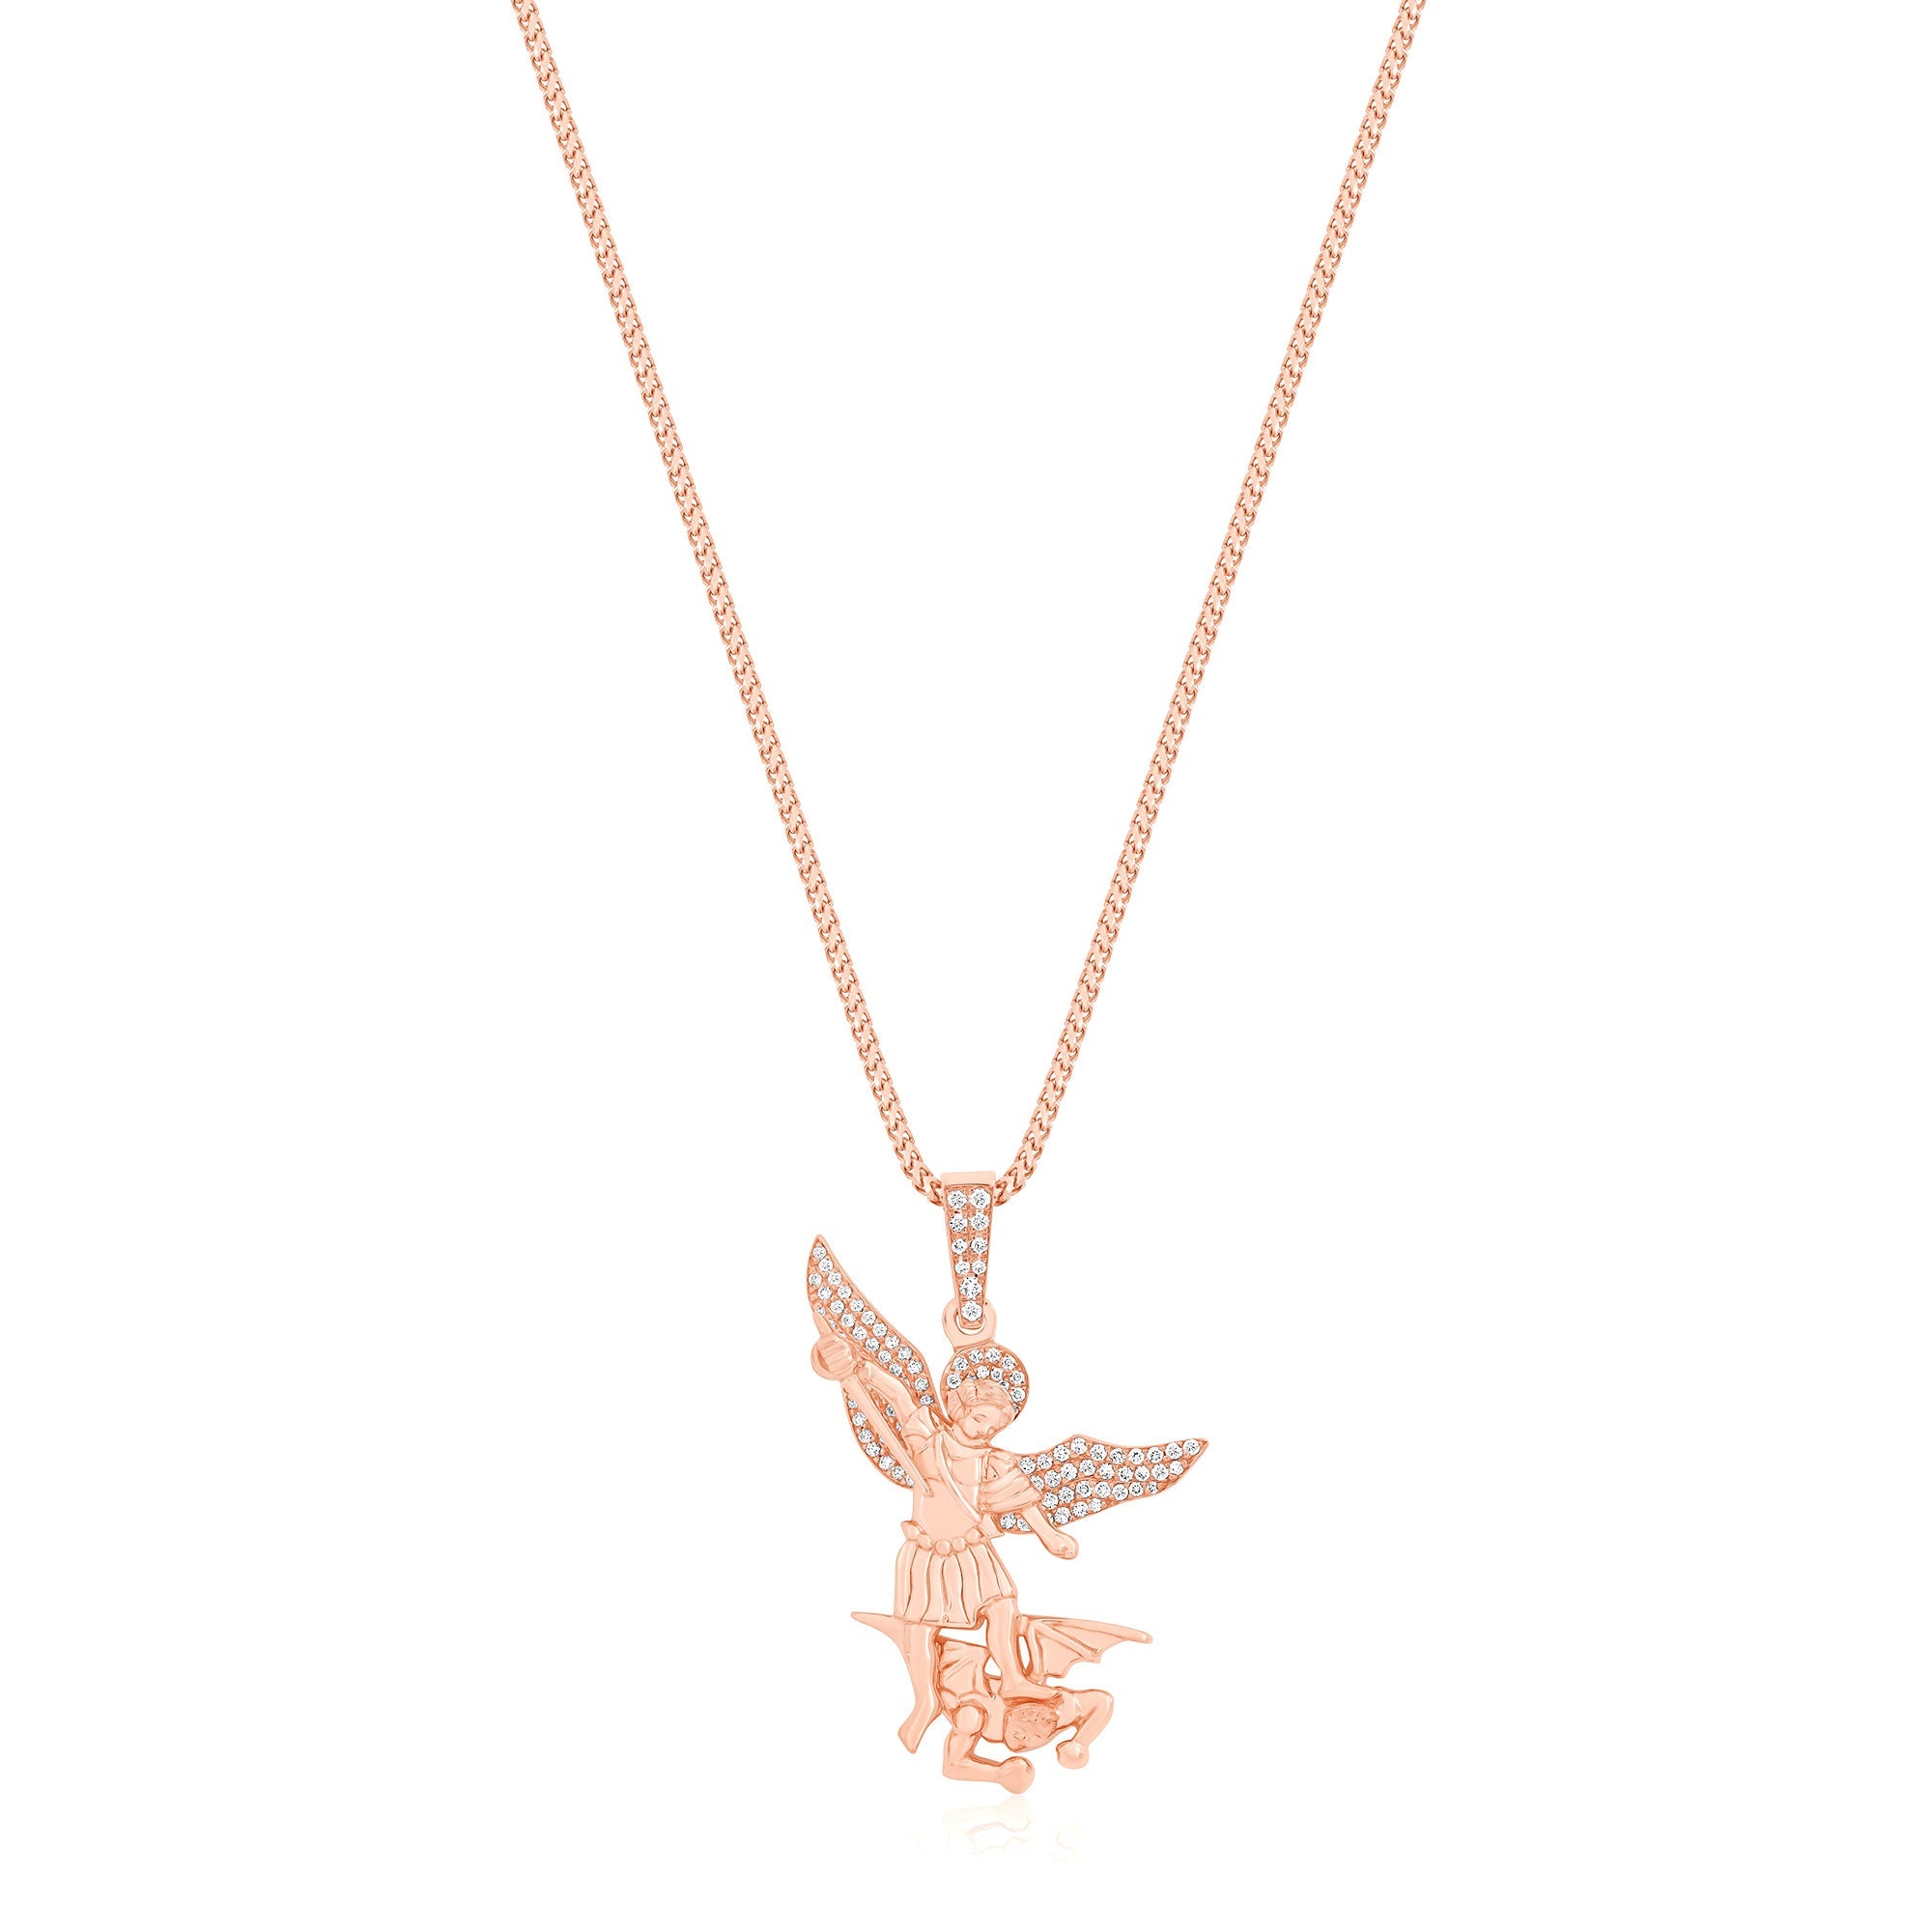 Micro Saint Michael Arch Angel Piece (Partially Iced) (14K ROSE GOLD) - IF & Co. Custom Jewelers